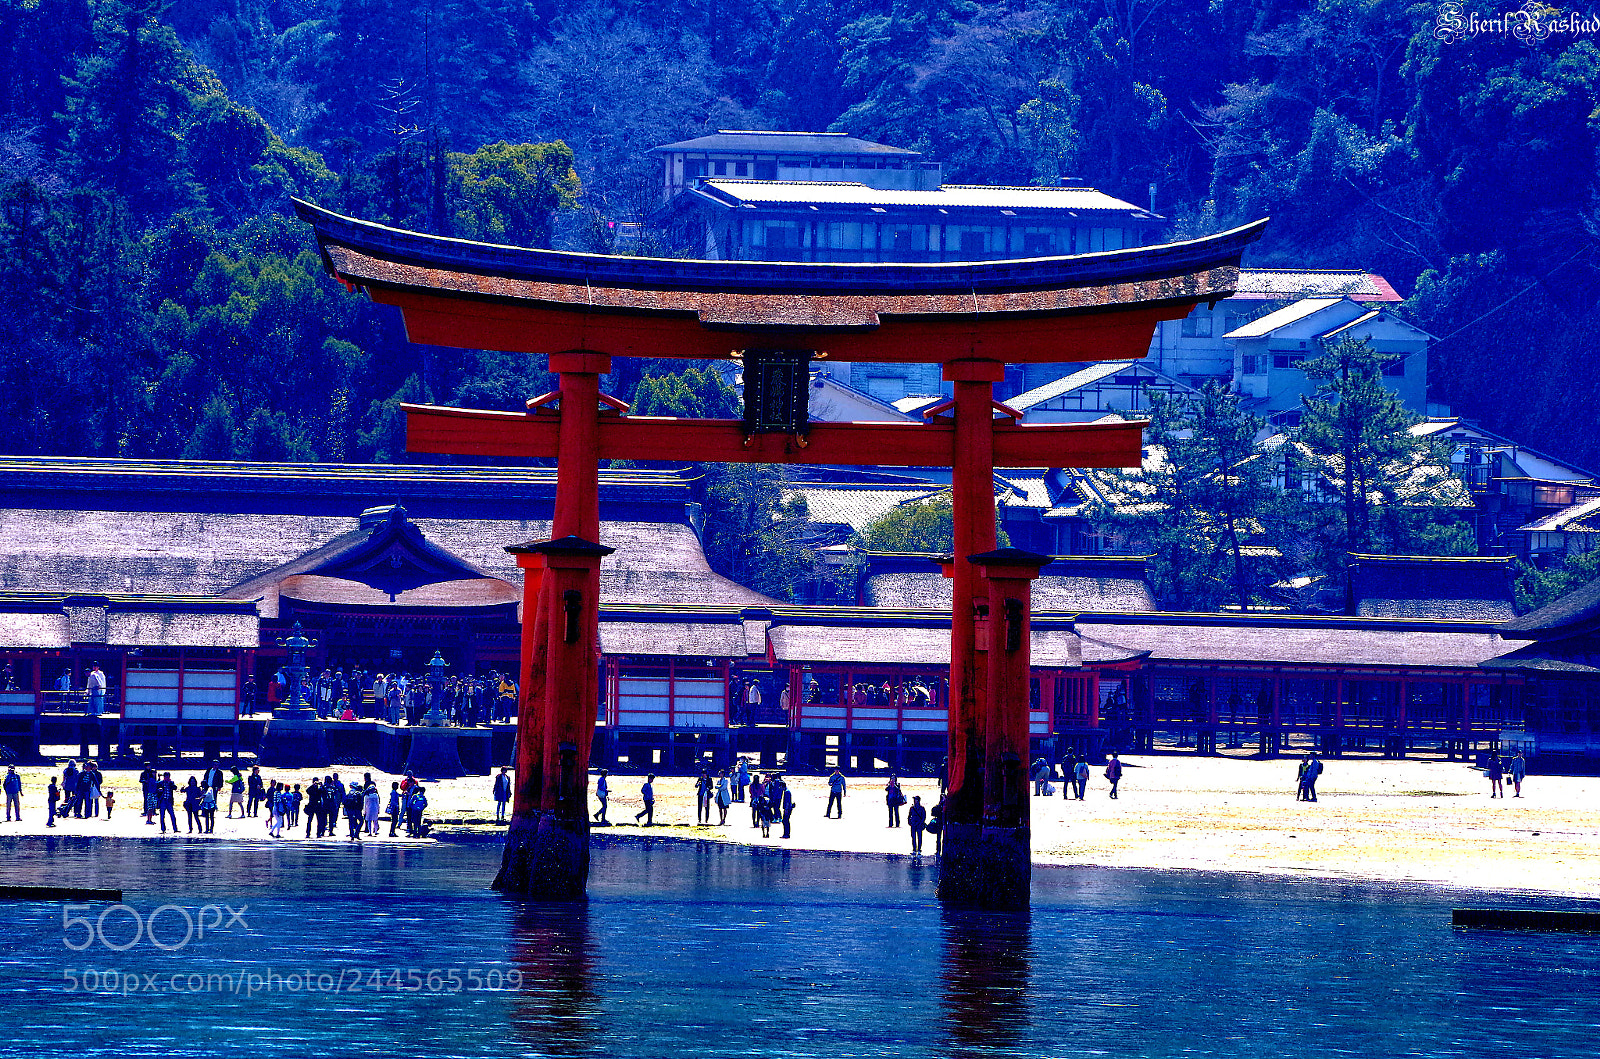 Pentax K-50 sample photo. The great torii photography